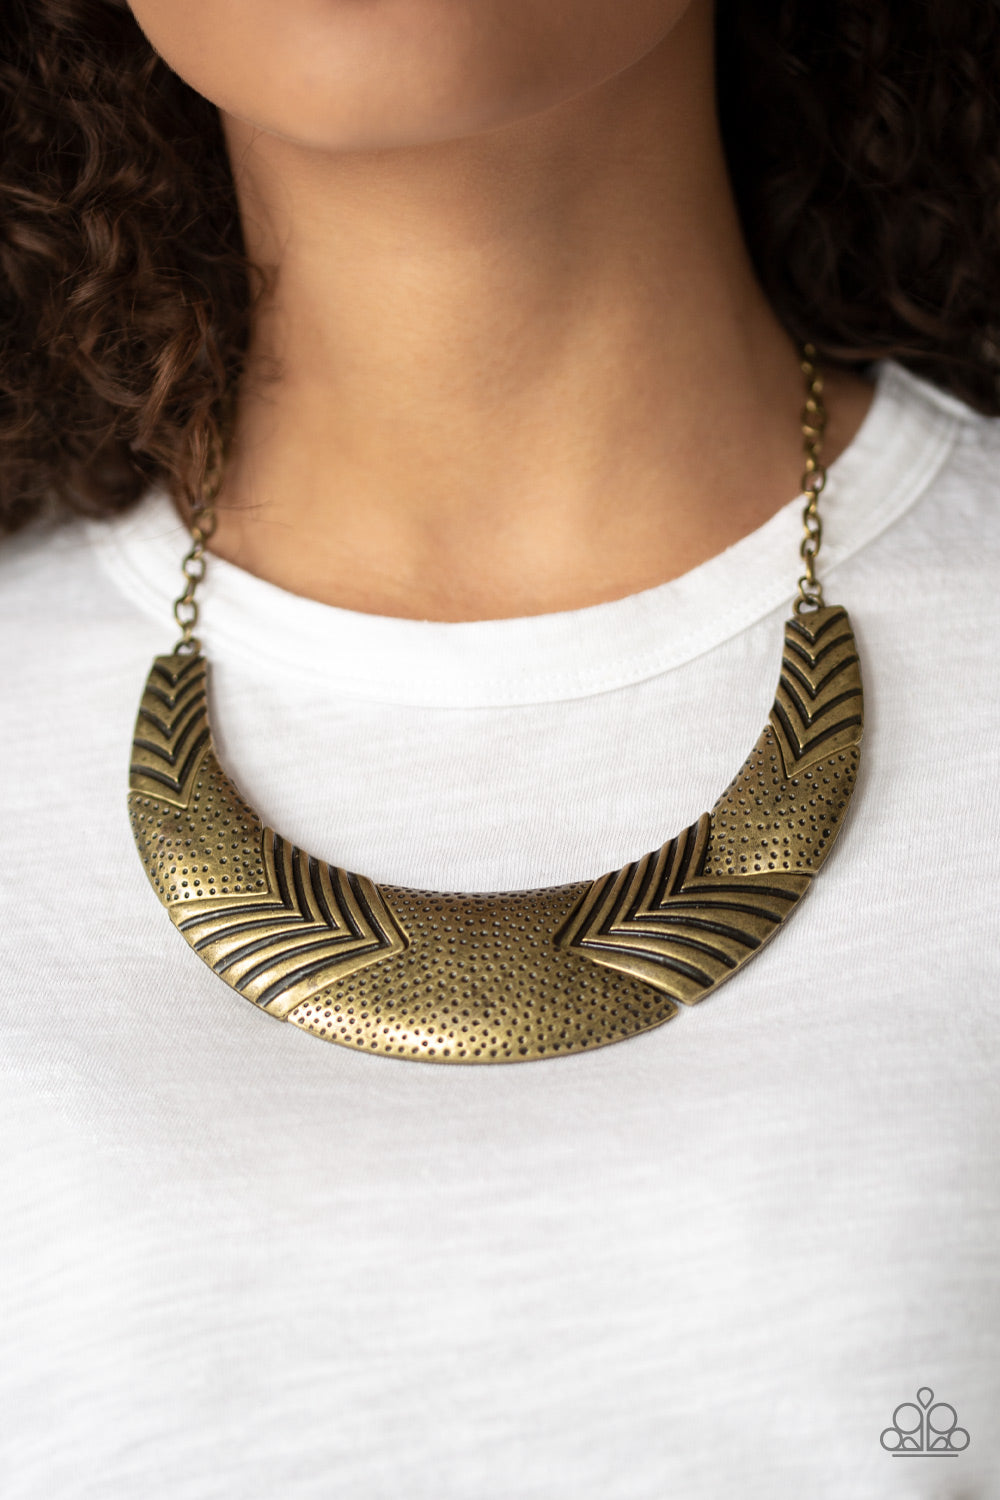 Geographic Goddess Necklaces - Brass